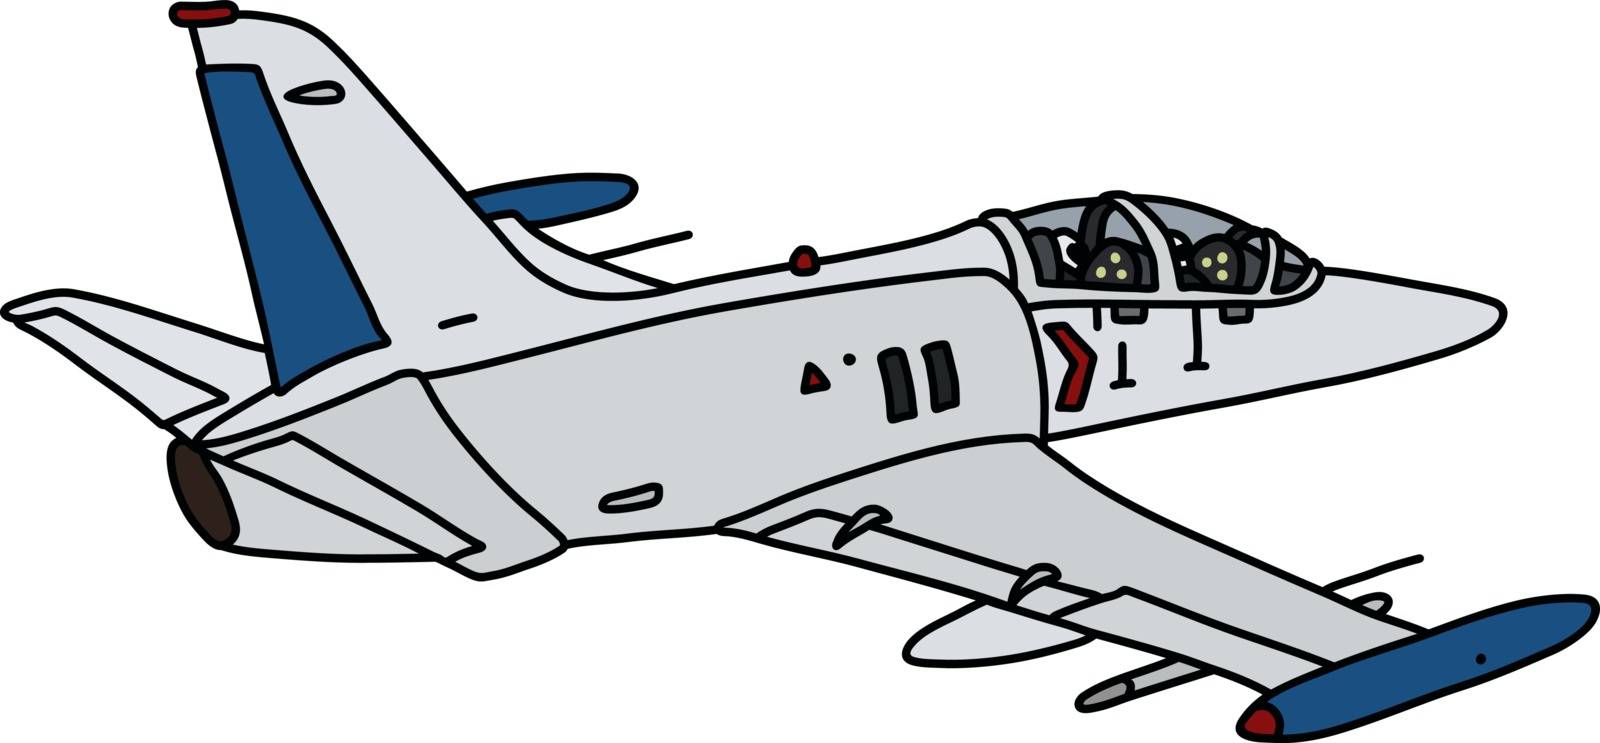 The vectorized hand drawing of a white light combat jet aircraft